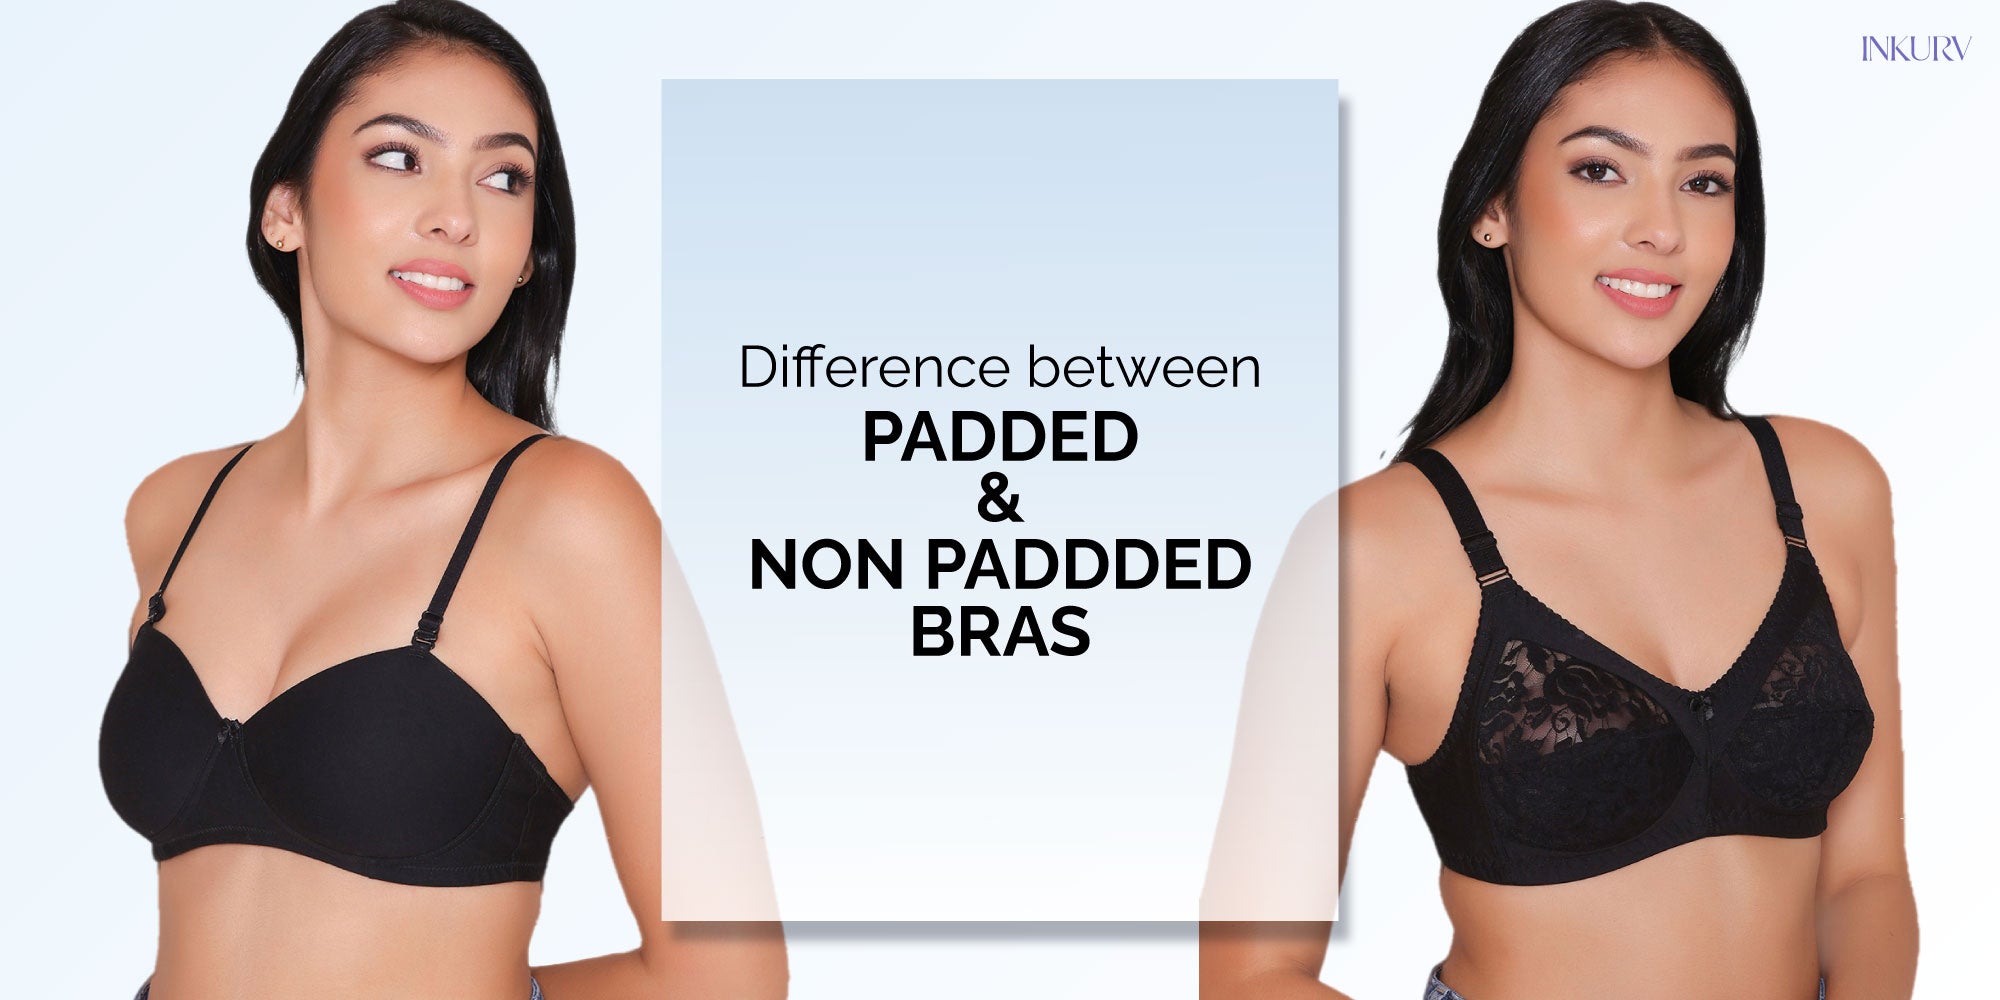 Non-Padded Bras - the difference between Padded & Non-Padded bra? – INKURV  | Bras and Active Wear